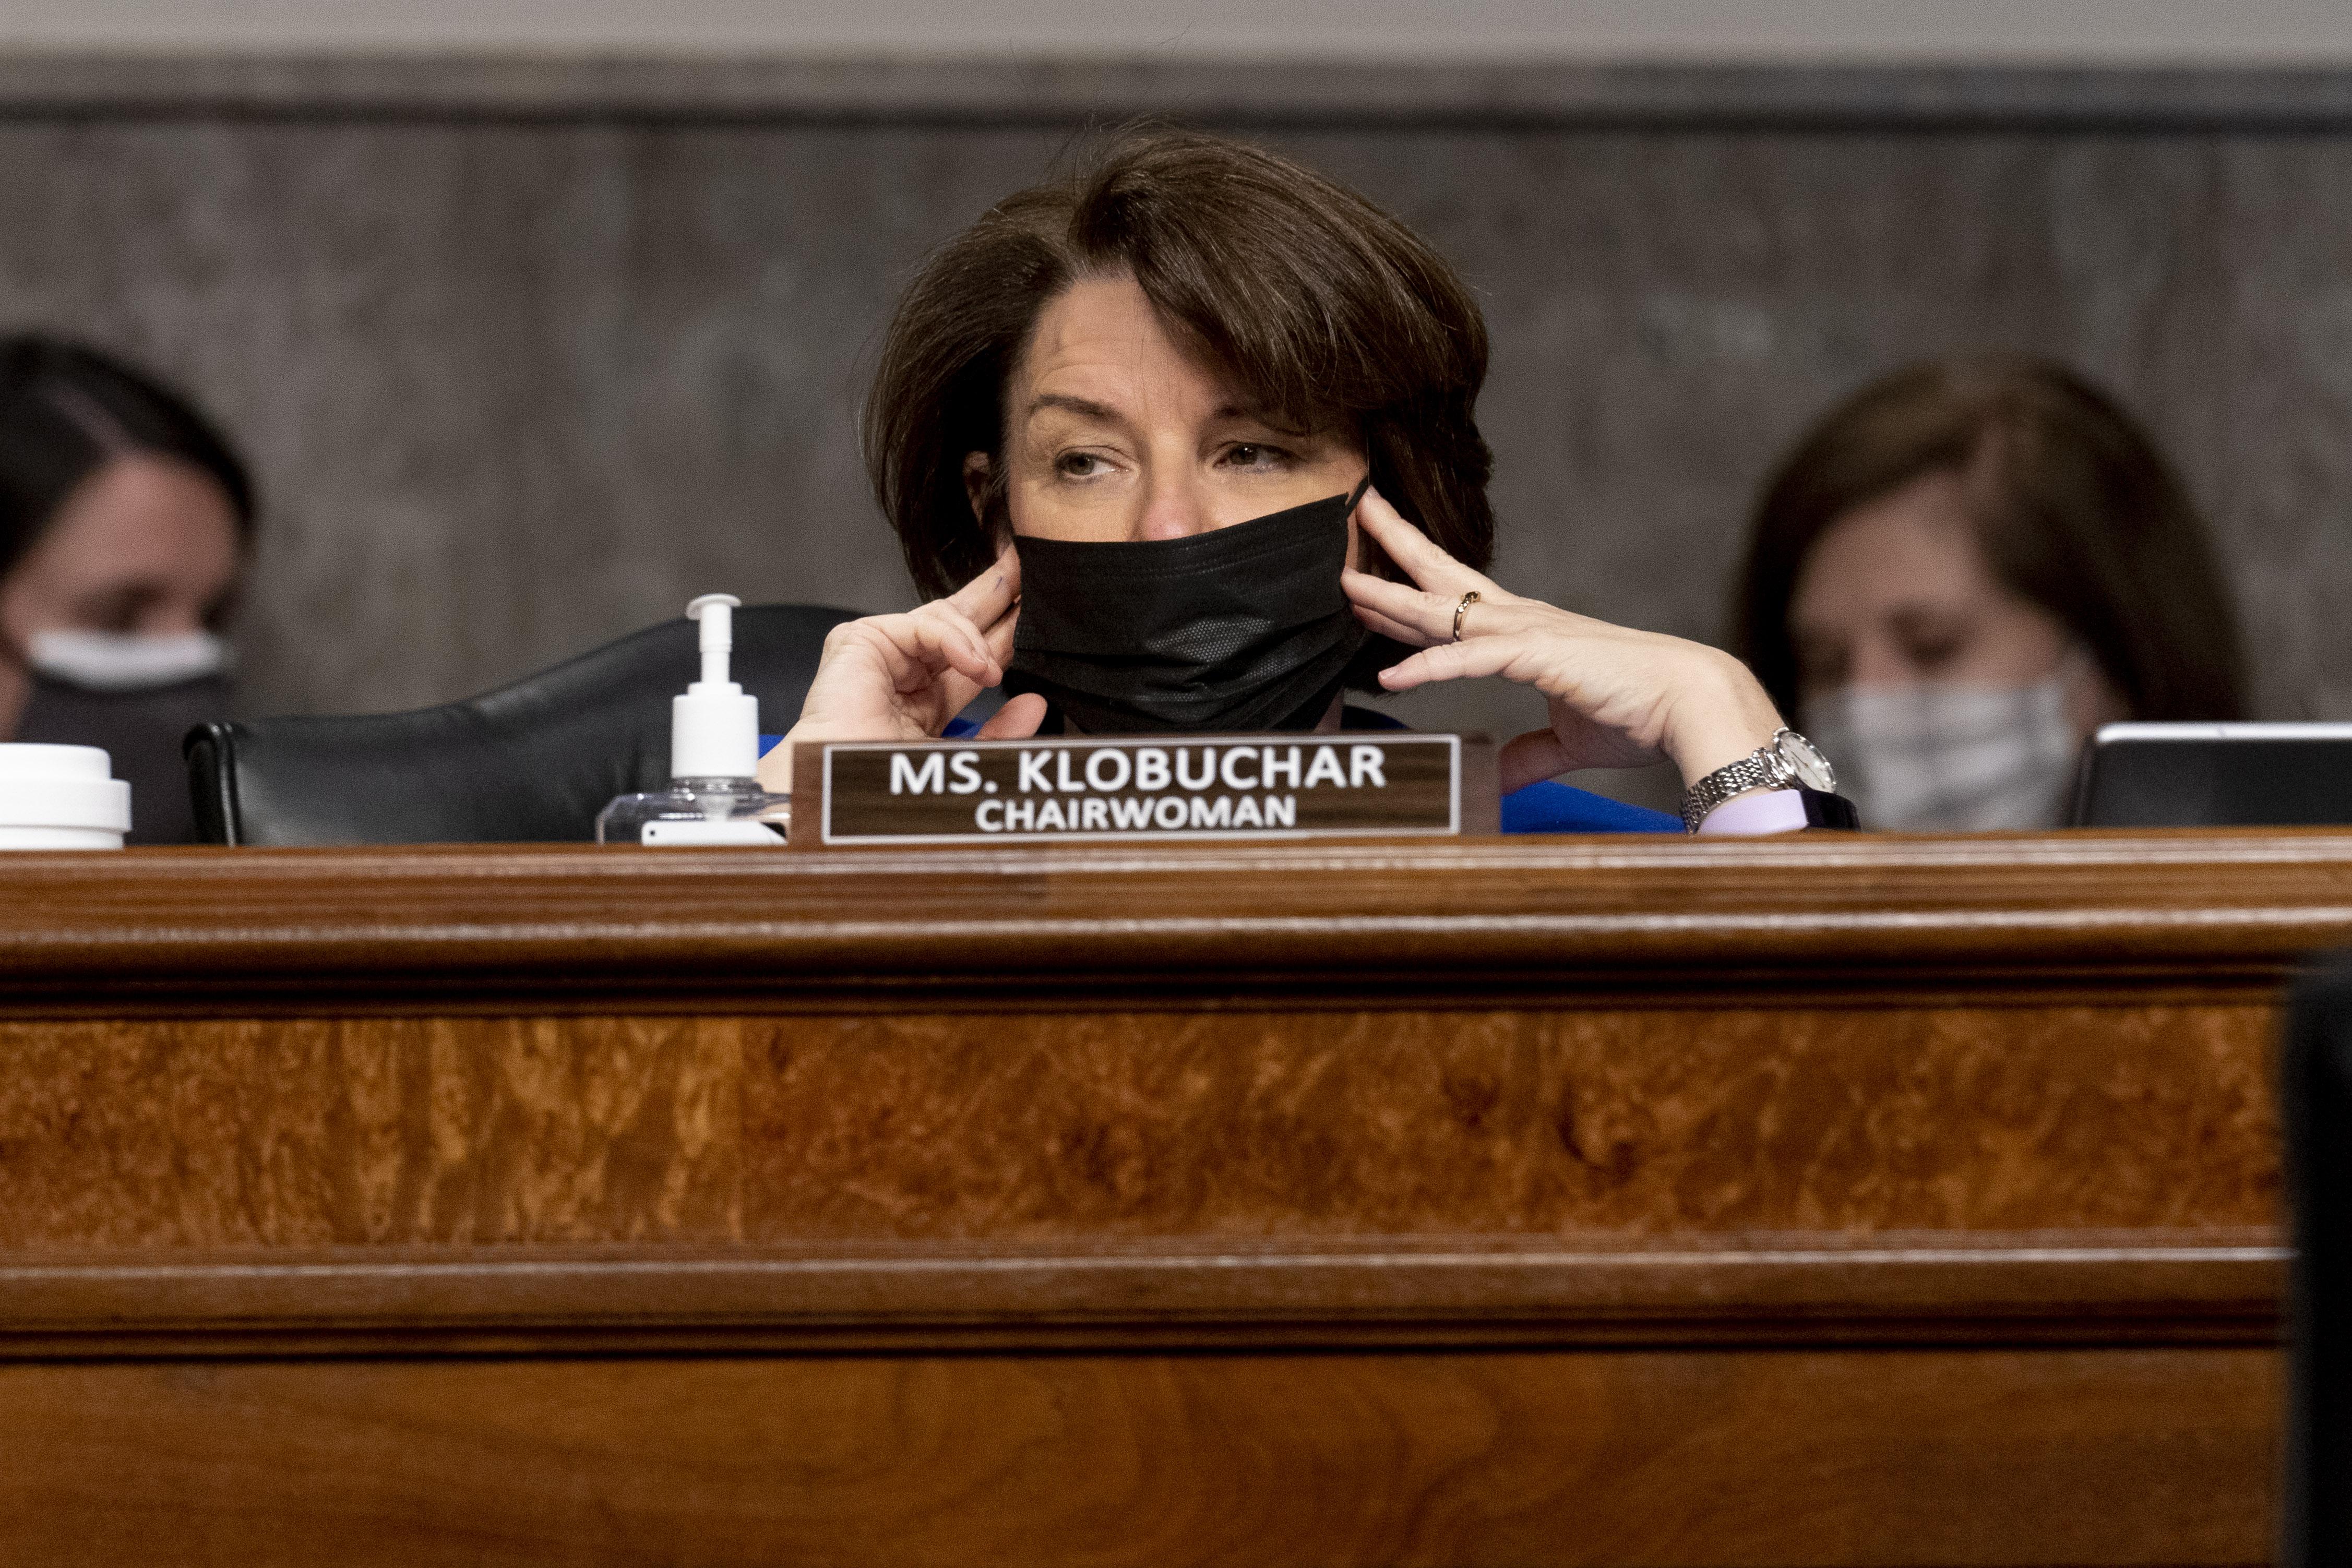 Amy Klobuchar holds her mask in place while sitting behind the dais.